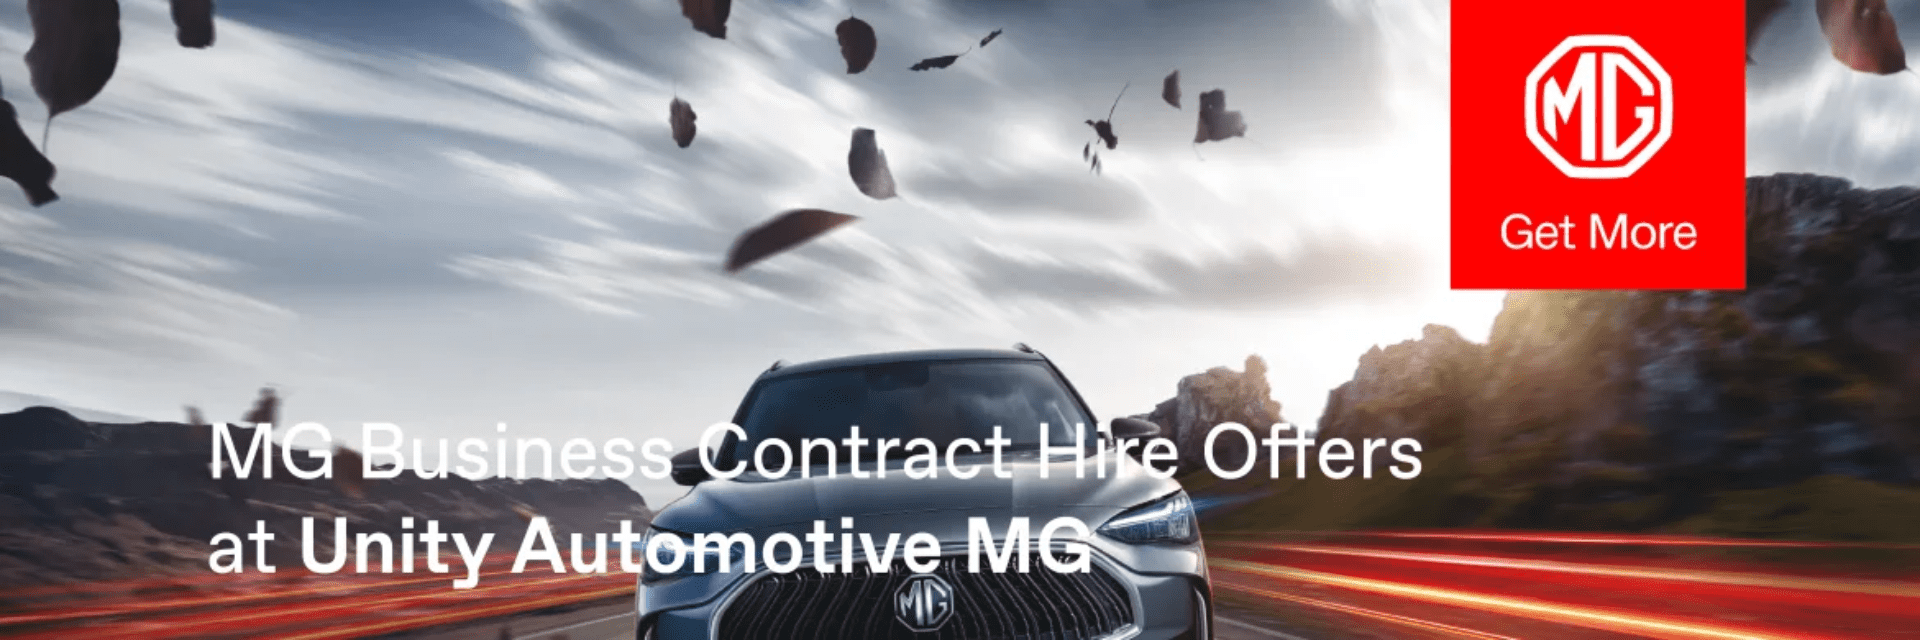 MG Business Contract Hire Offers at Unity Automotive